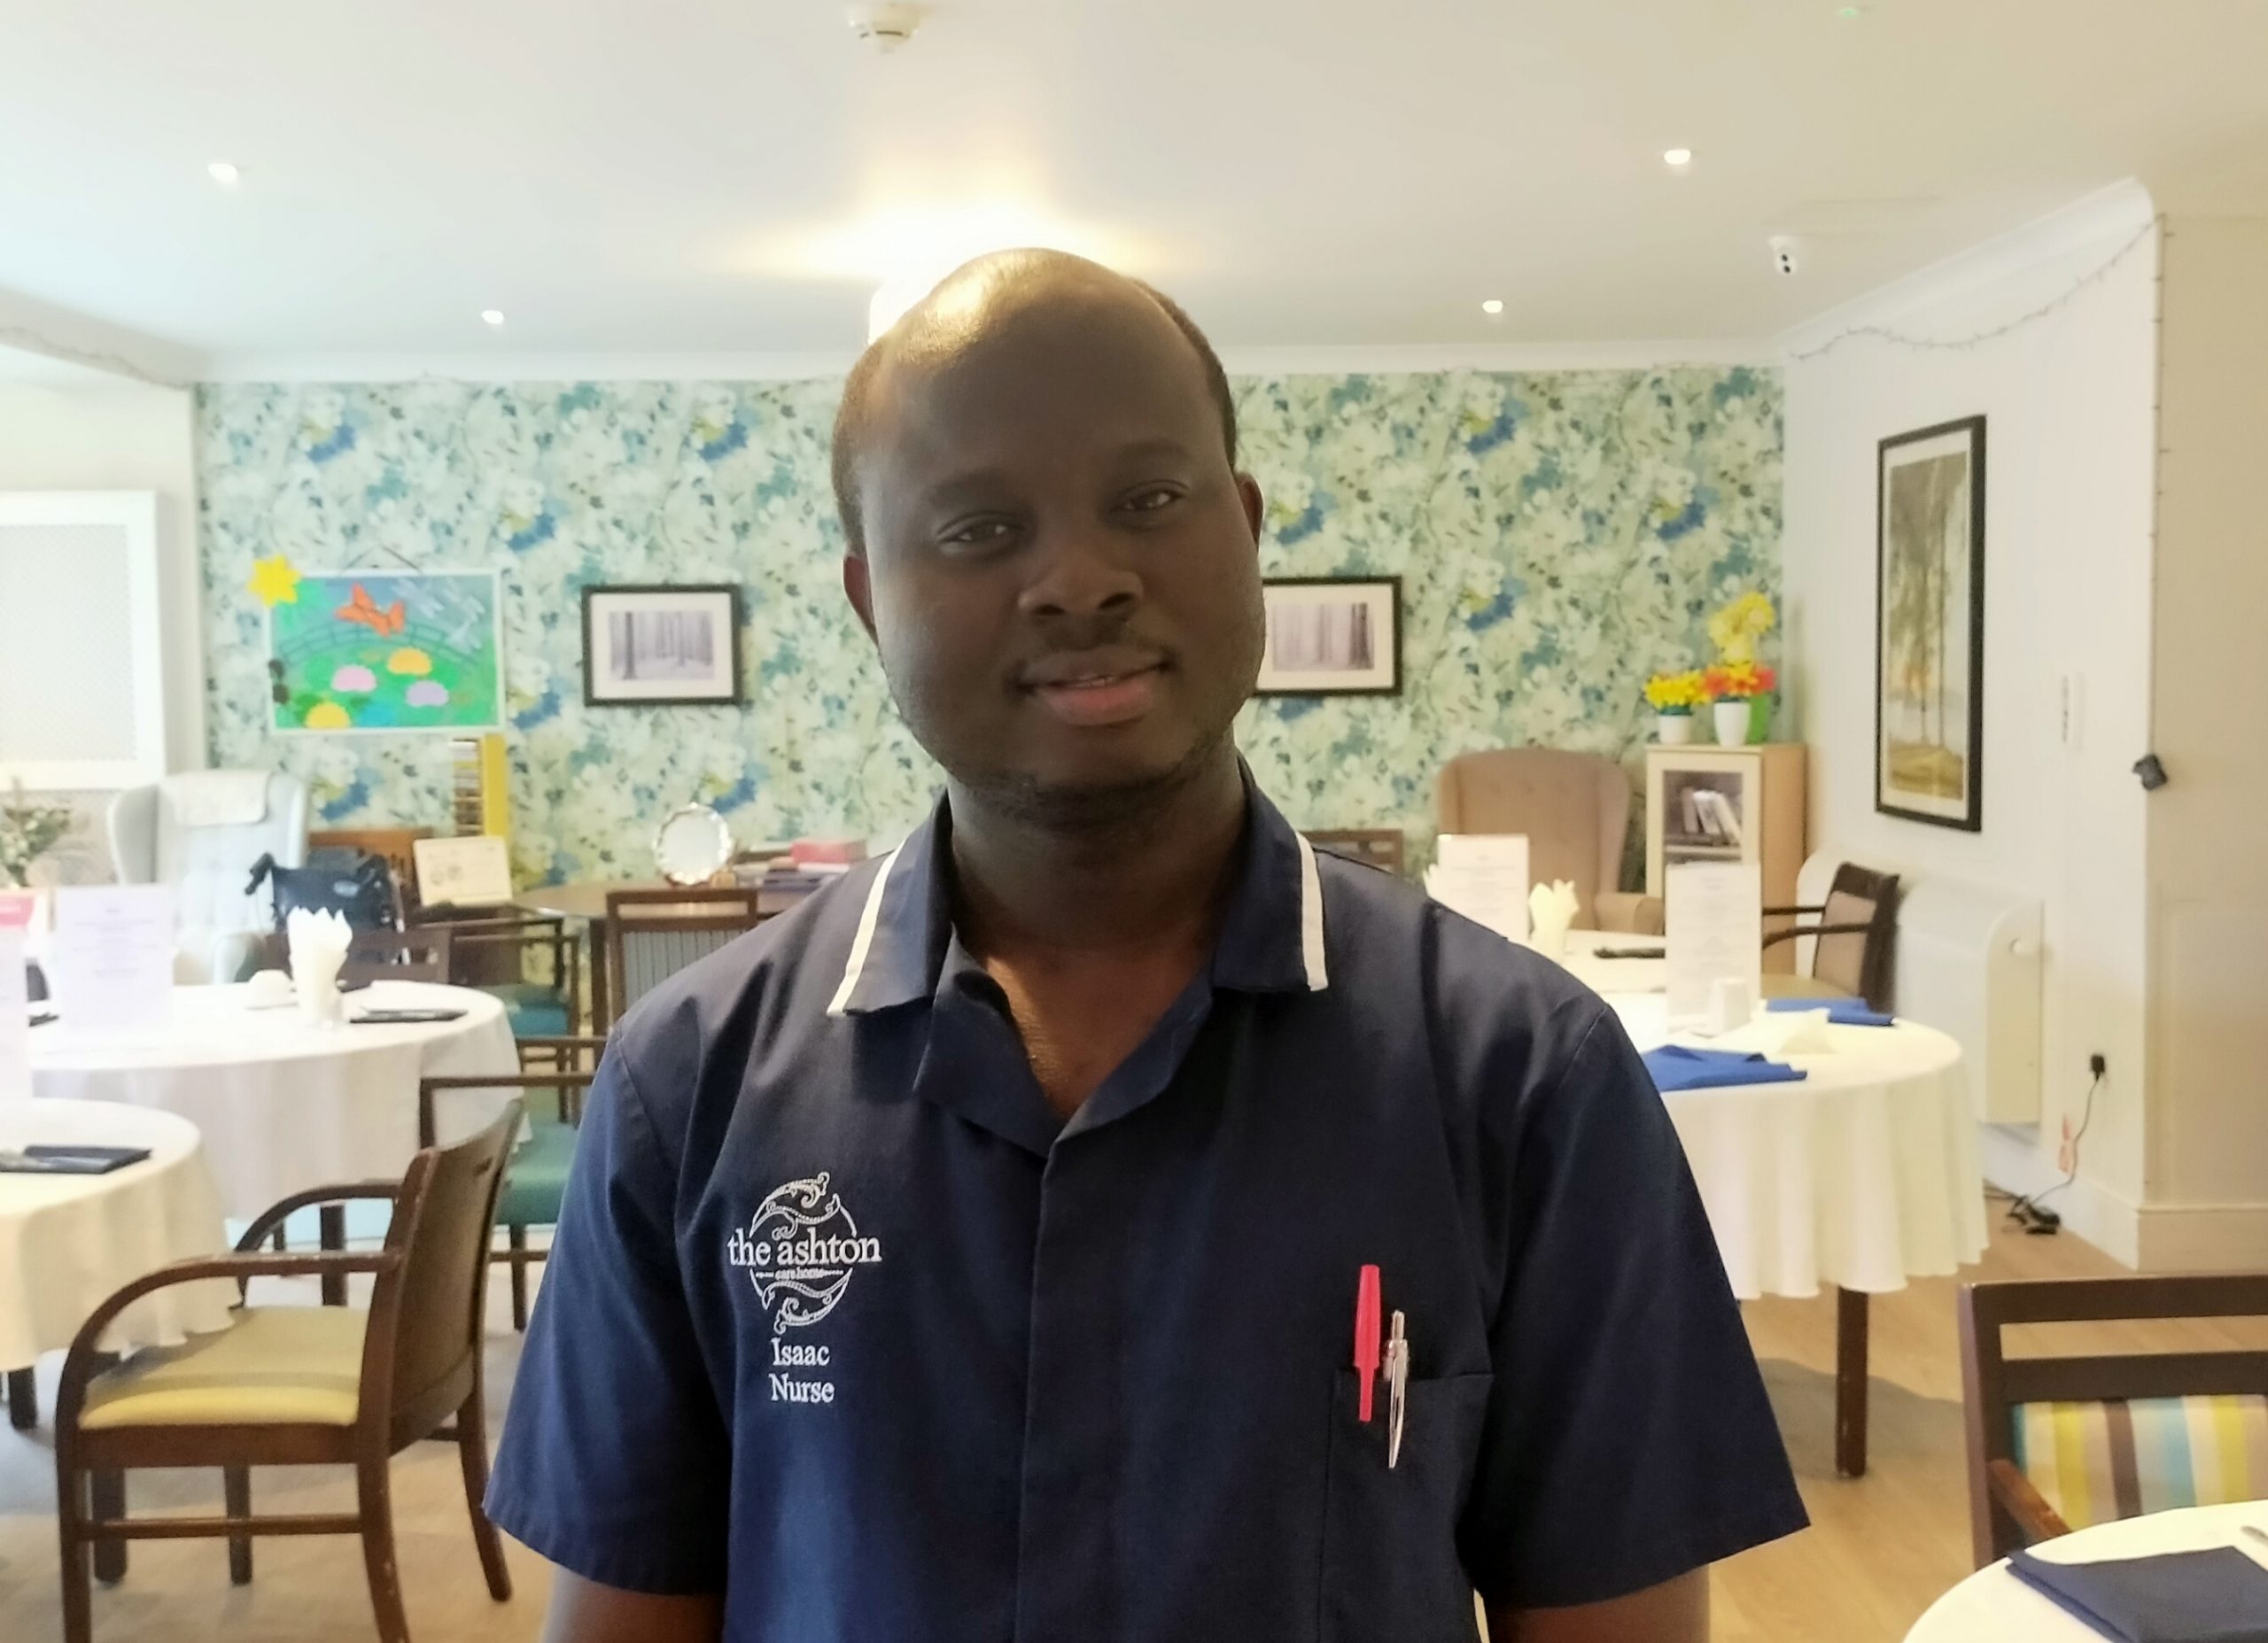 A male nurse in the restaurant.